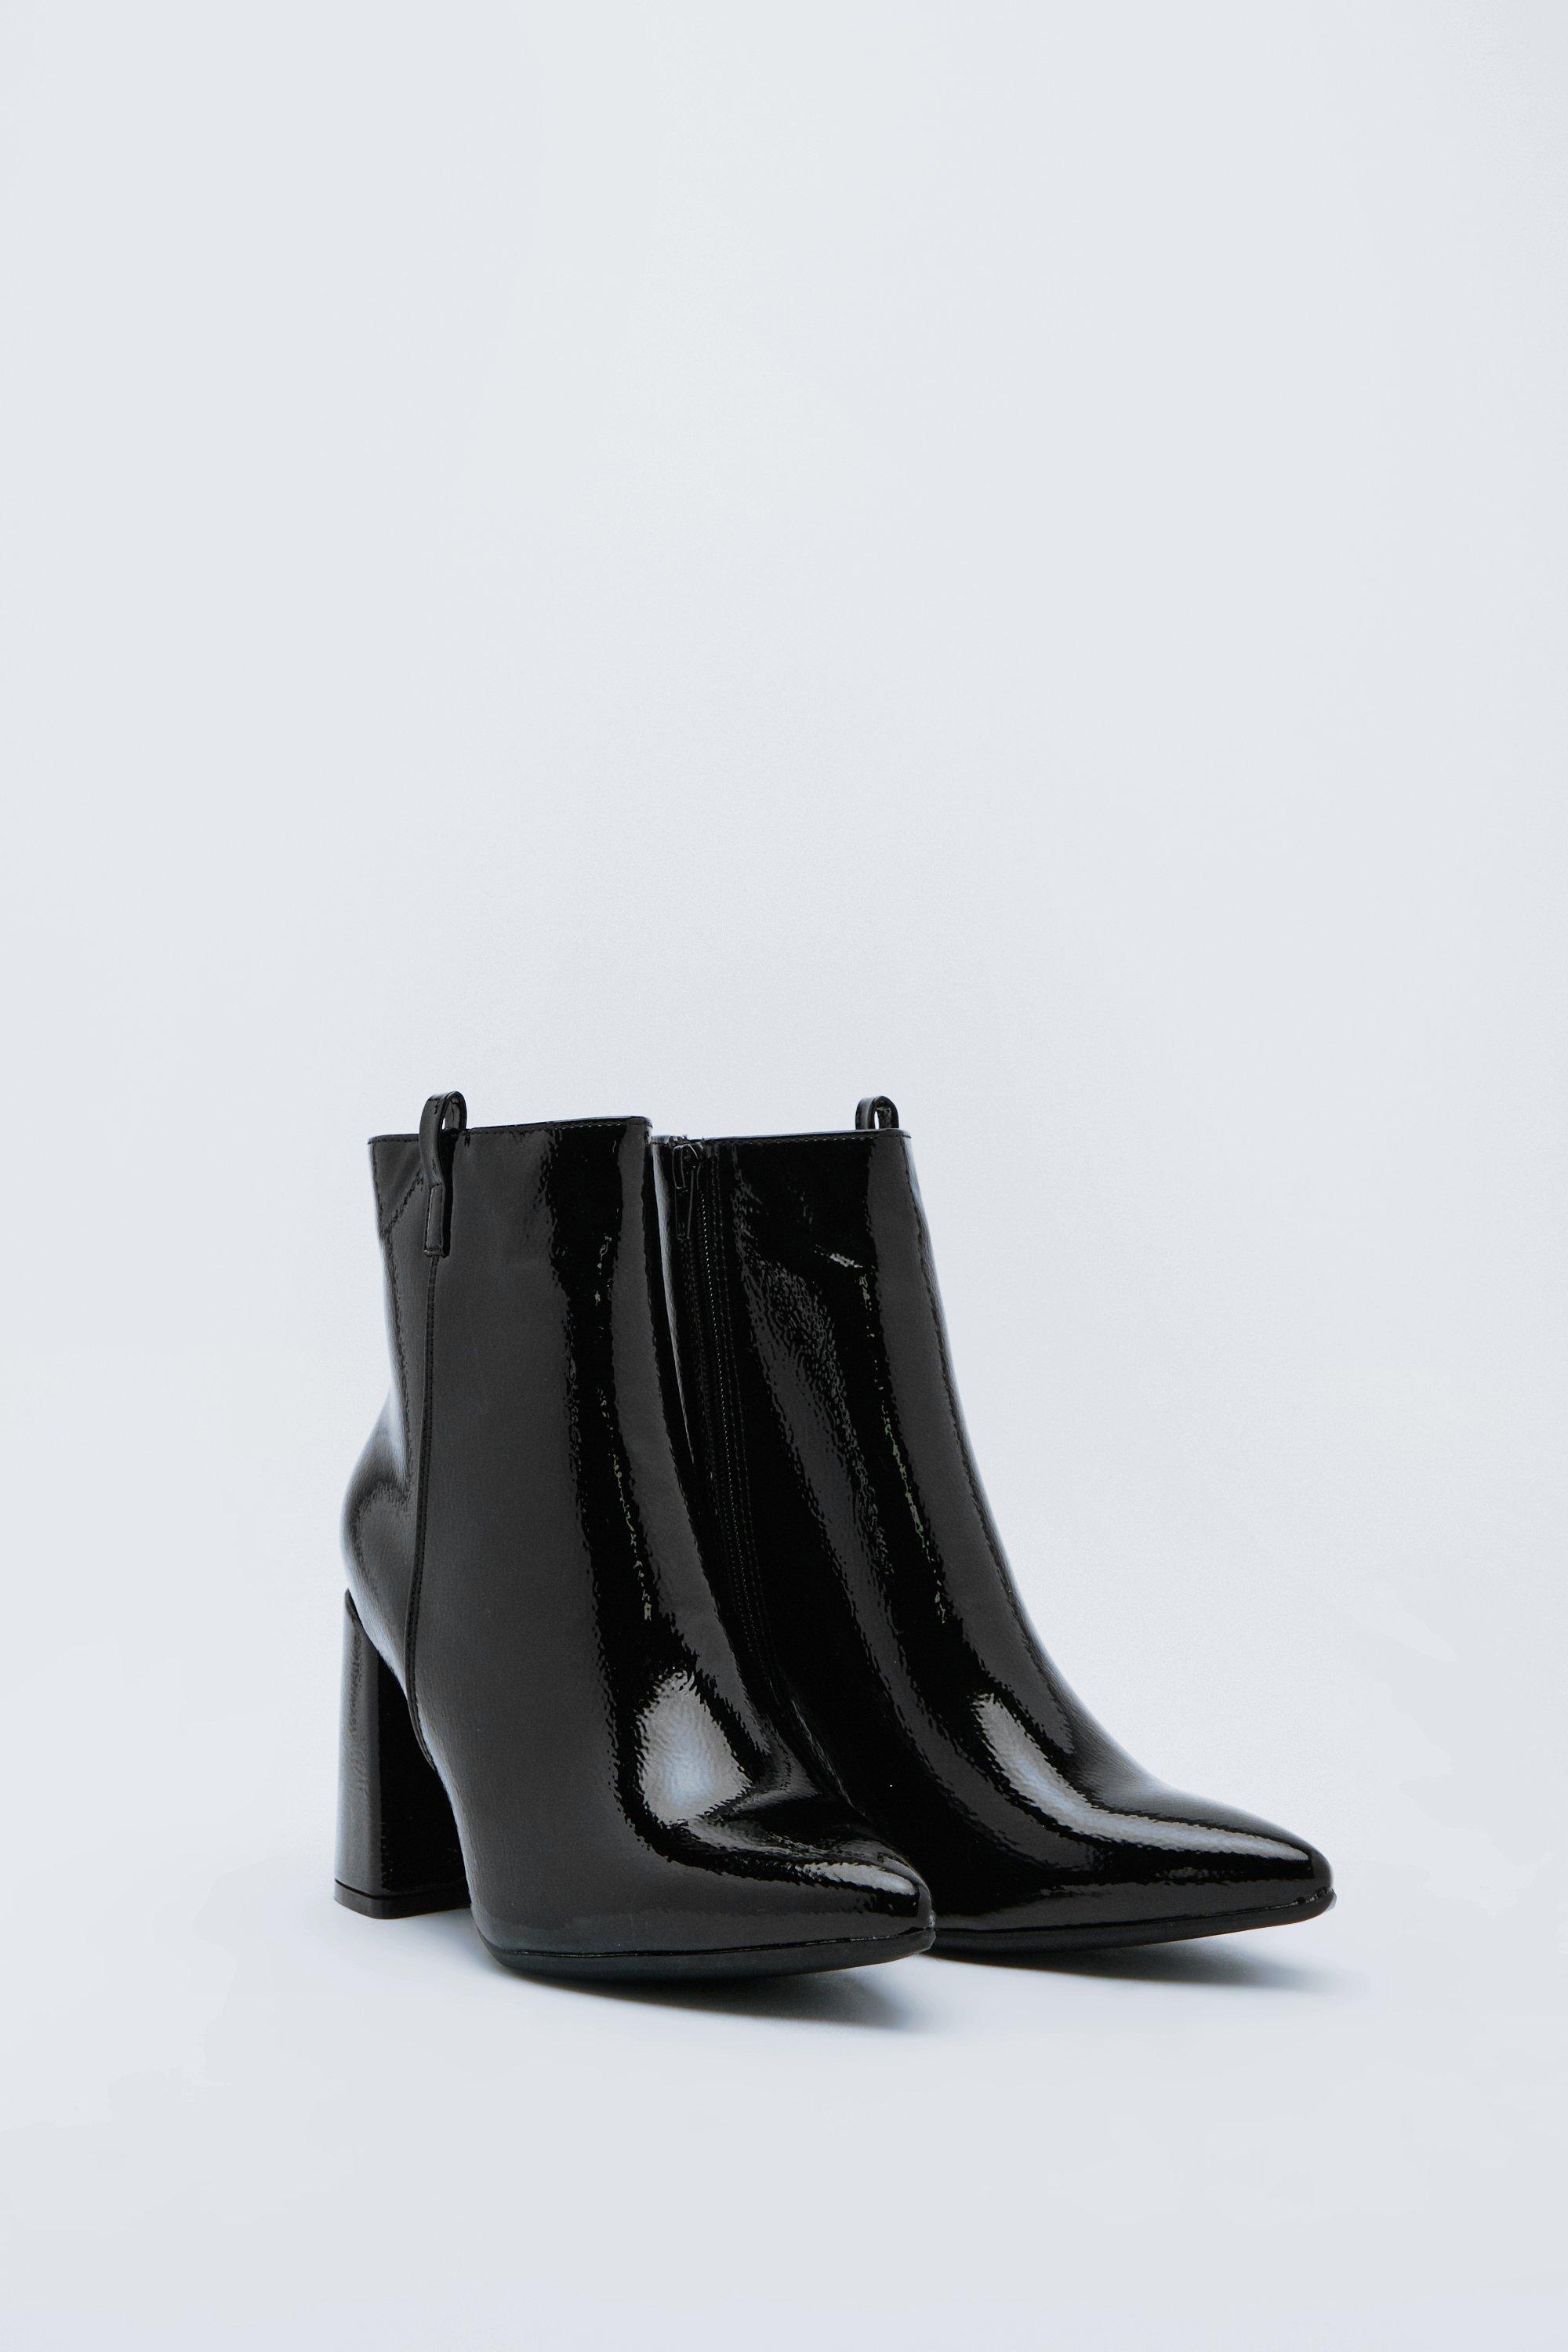 Your Love Shines On Patent Faux Leather Boots